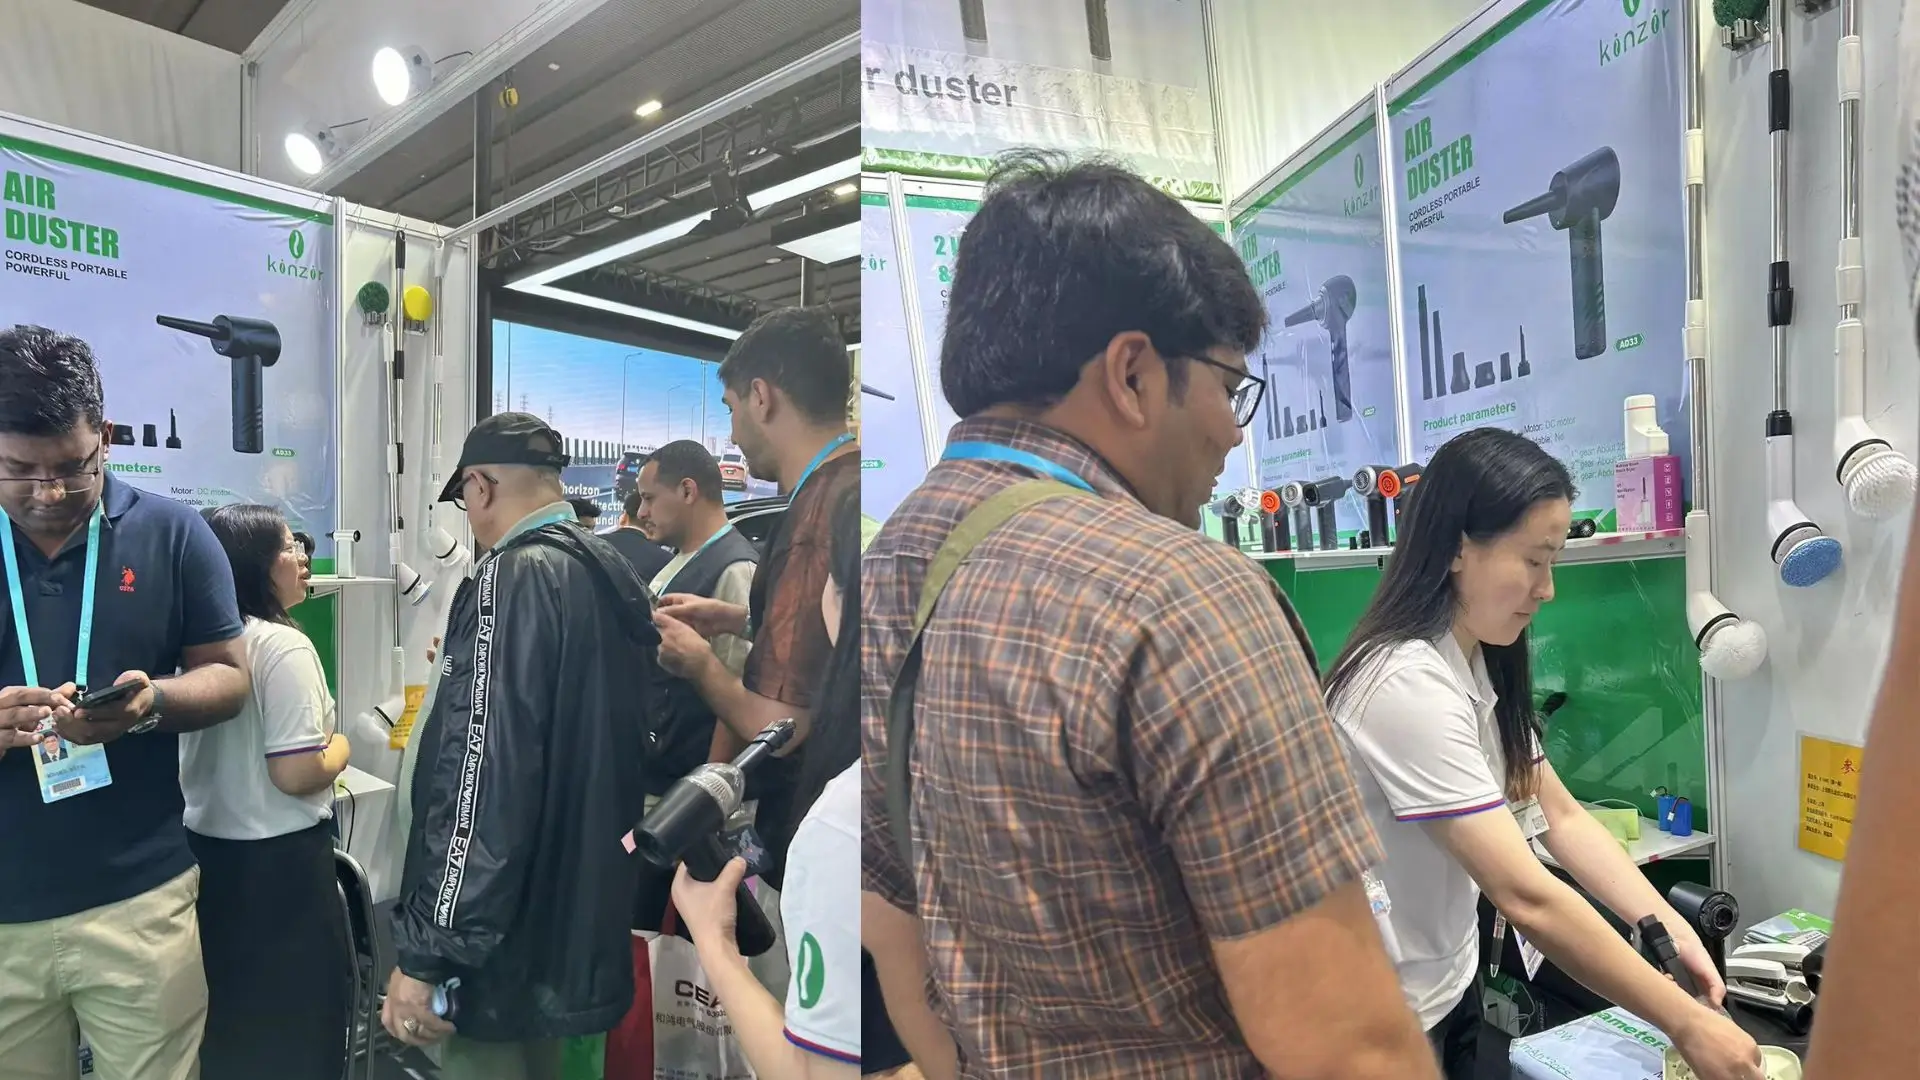 The 135th Canton Fair Post Show Report from Kinzir: Gain Insights into Kinzir's Performance and Achievements at One of the World's Largest Trade Events - Kinzir Exhibition - 3